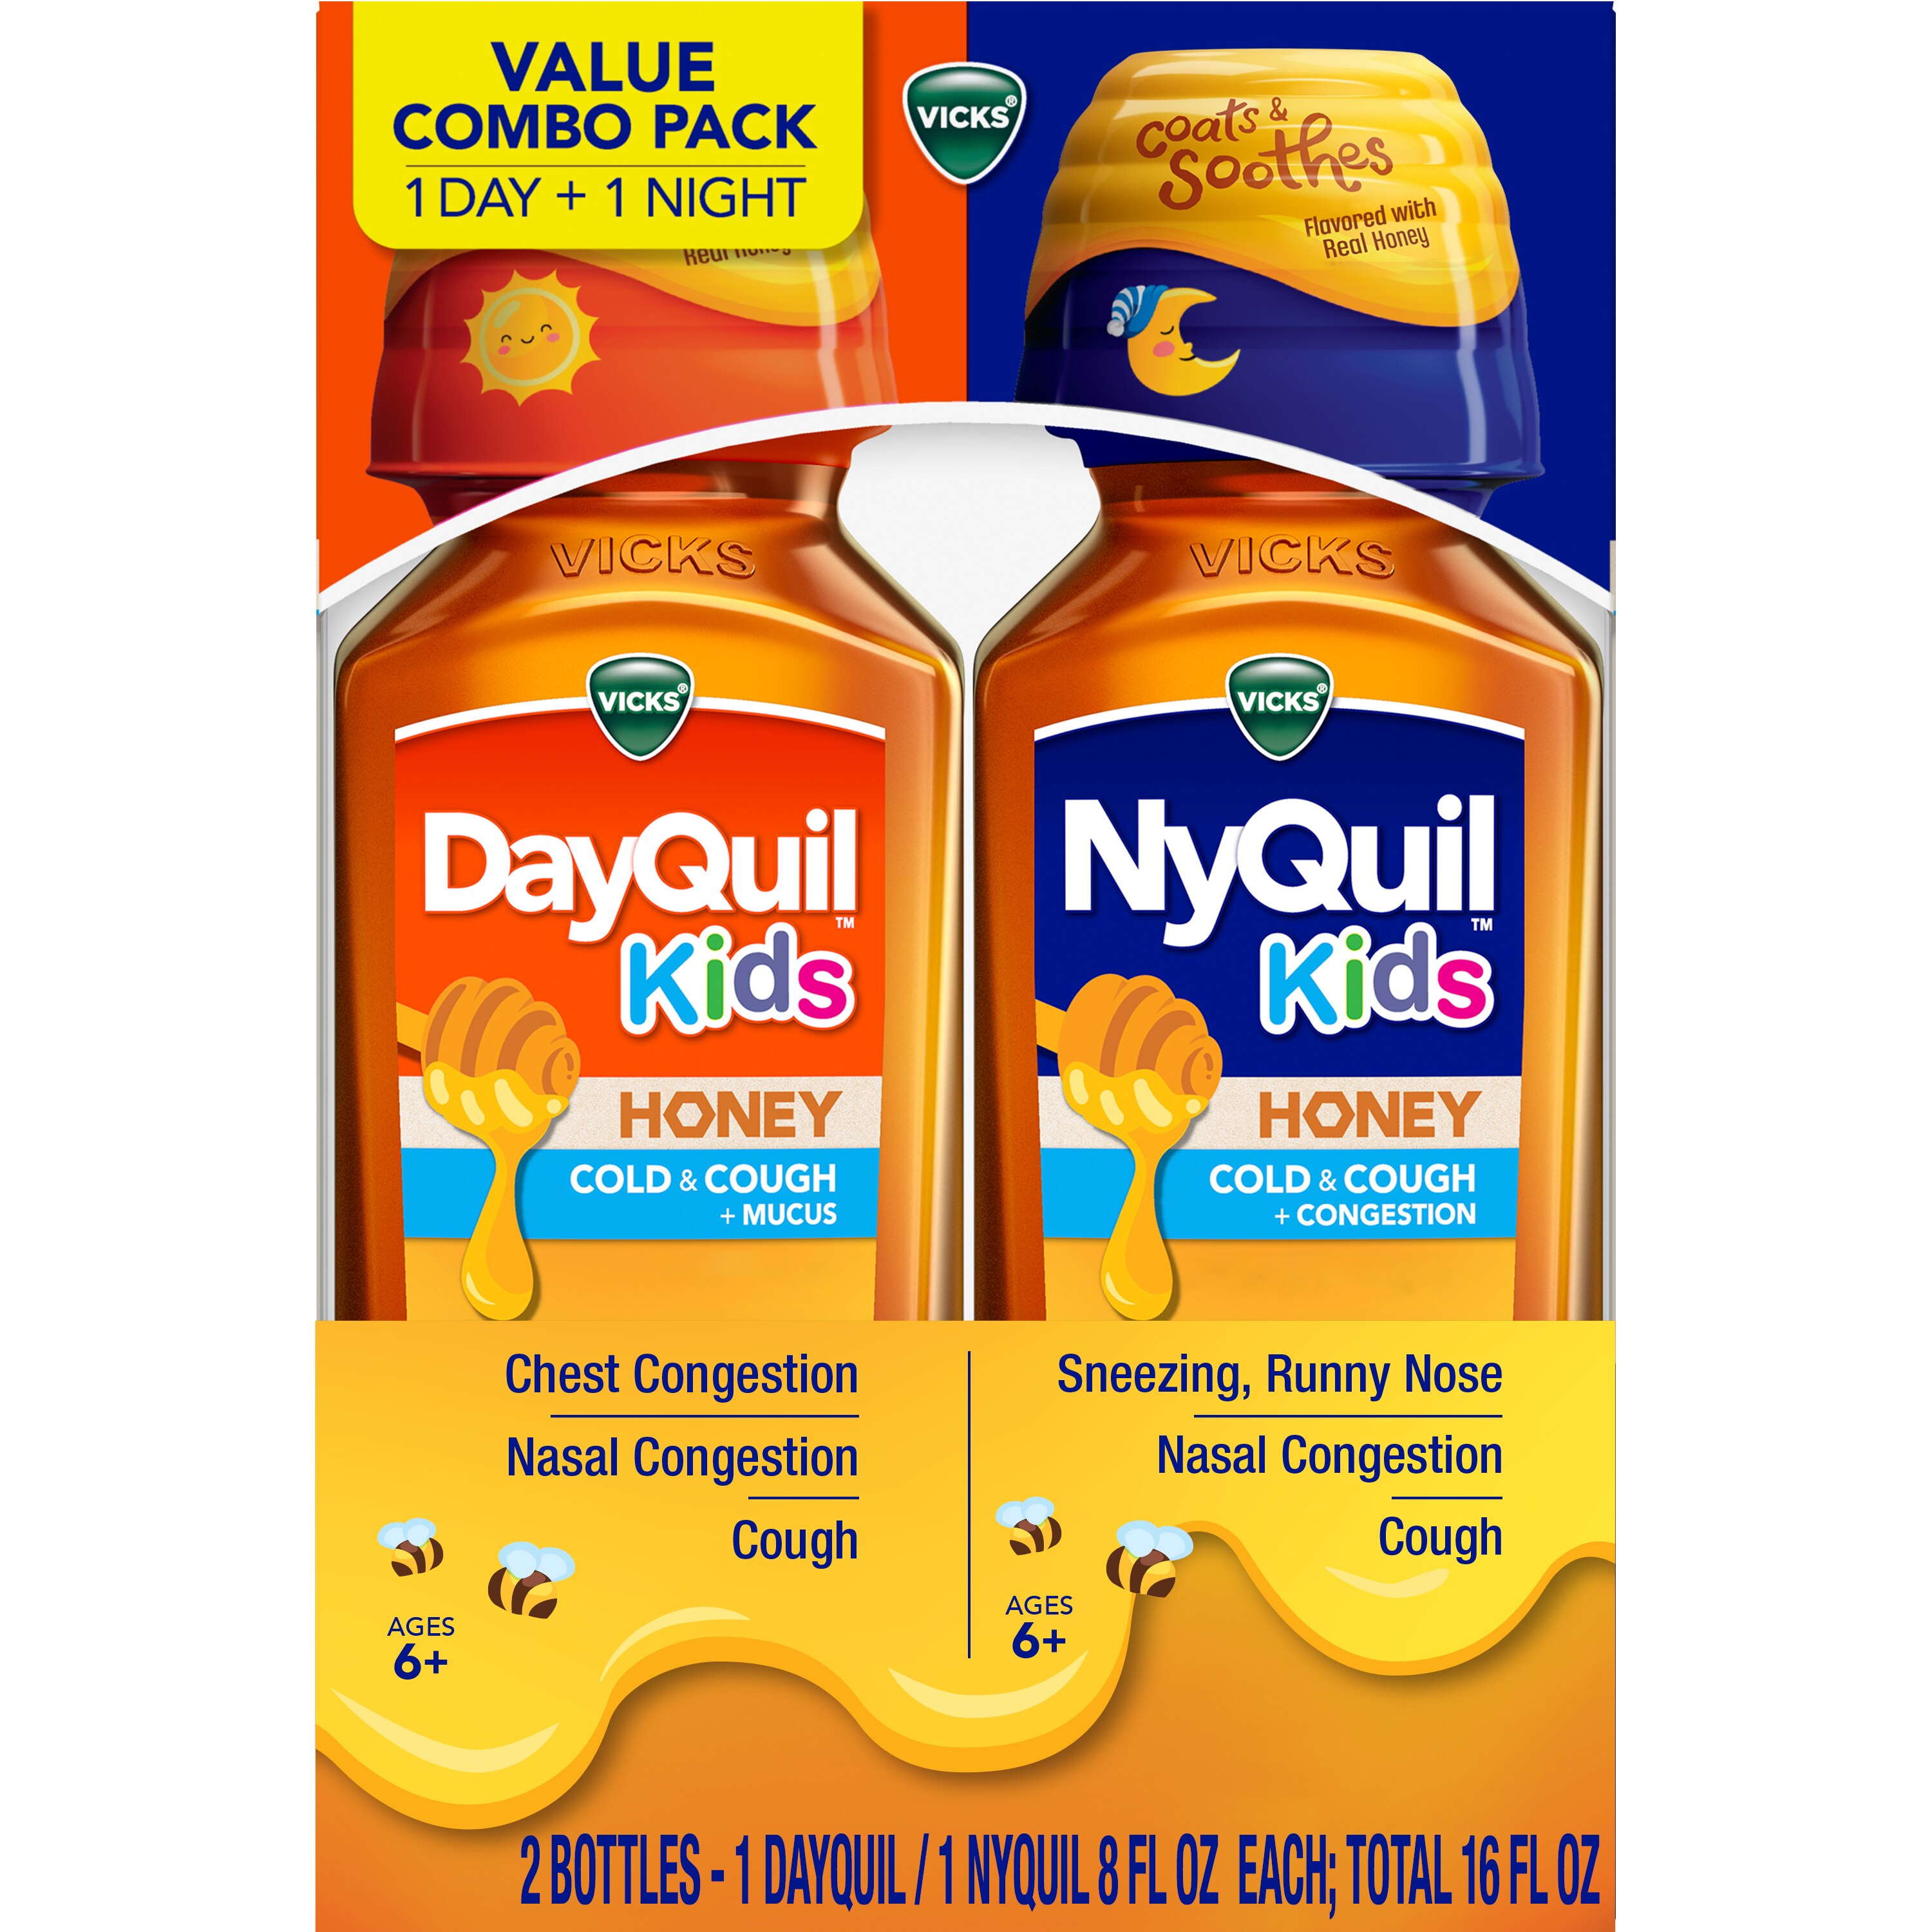 Vicks DayQuil and NyQuil Kids Cold & Cough + Mucus and Congestion Combo Pack, Honey, 2 8 OZ bottles